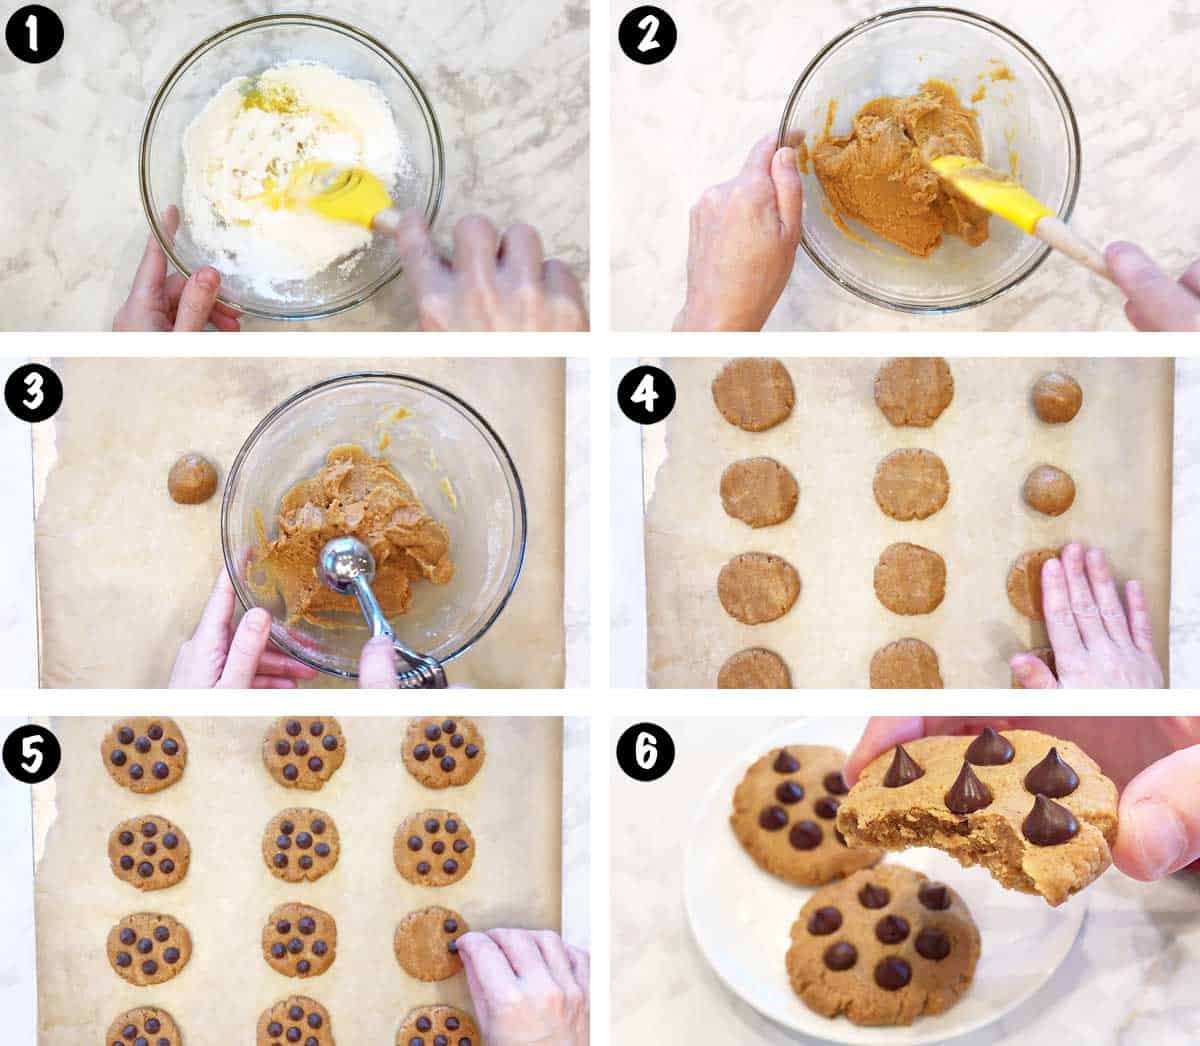 A six-photo collage showing the steps for making keto peanut butter cookies.